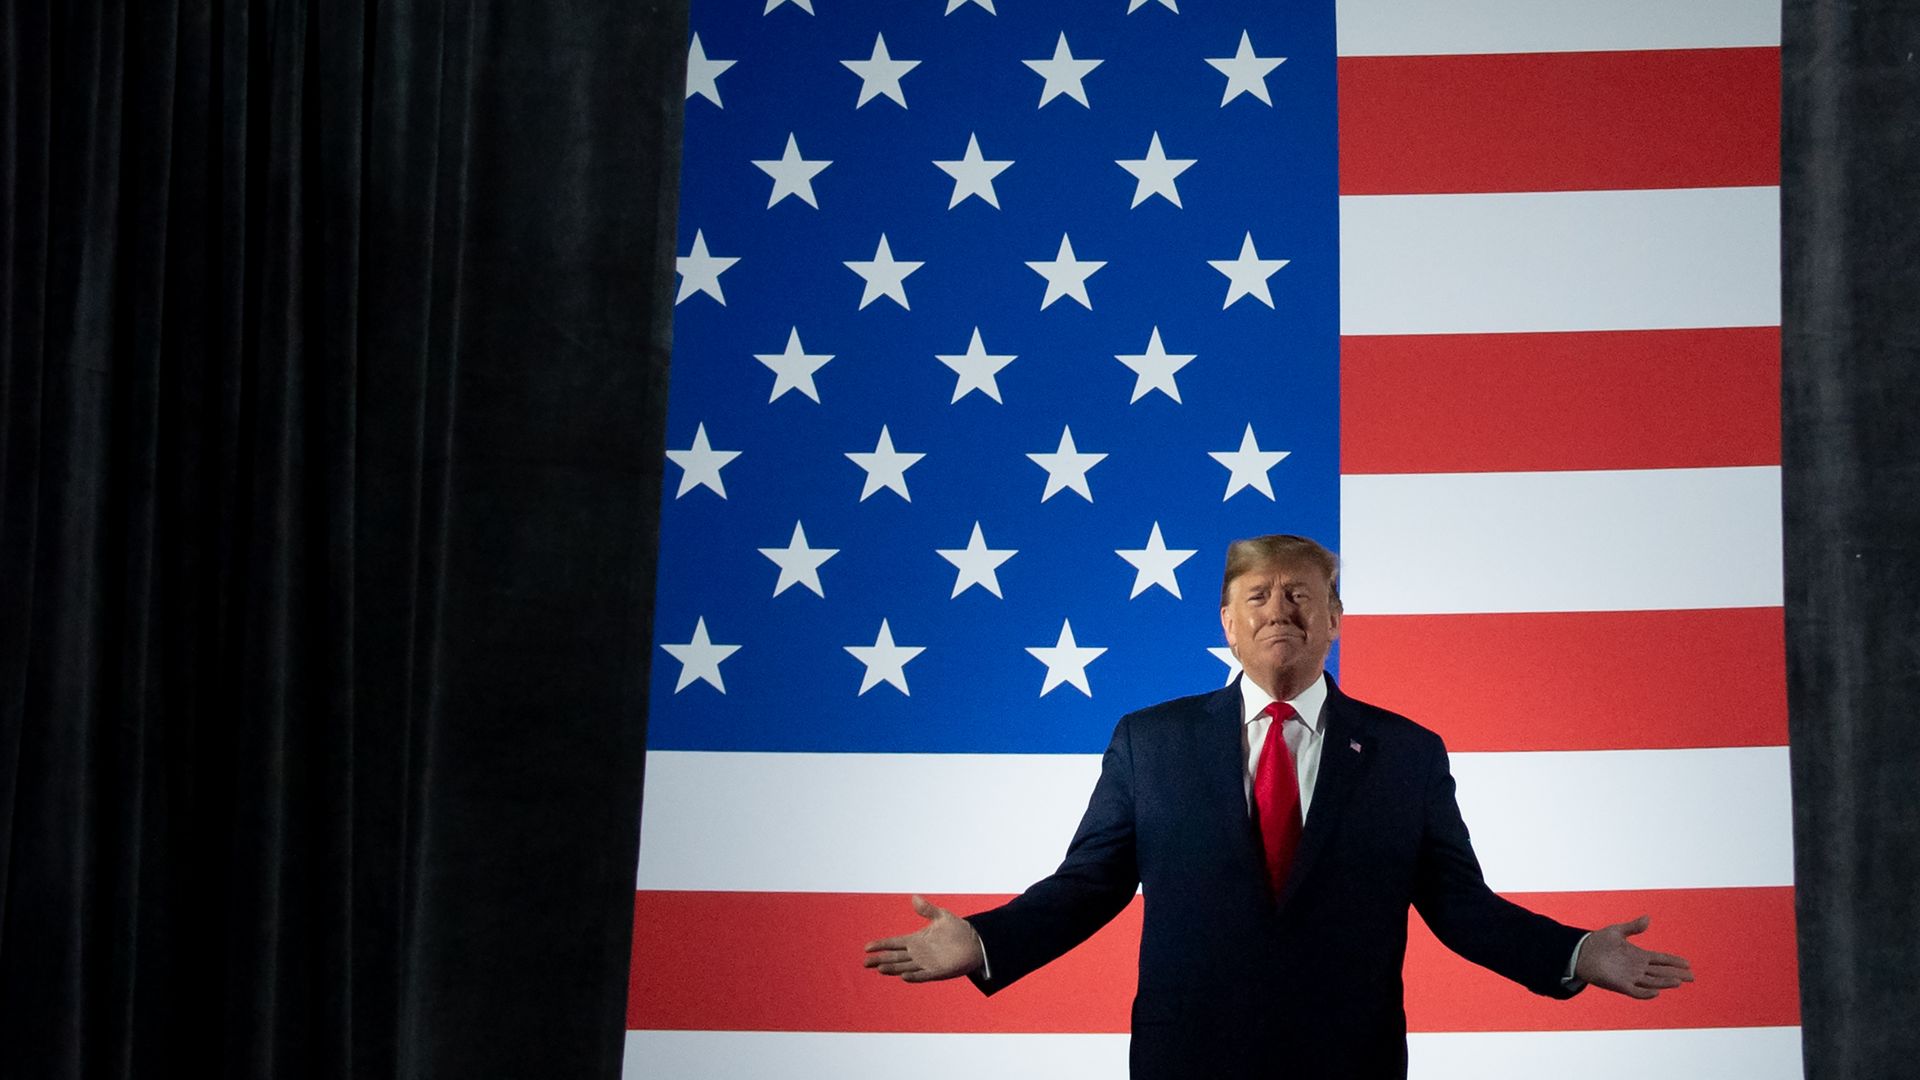 In this image, Trump stands with the American flag behind him.